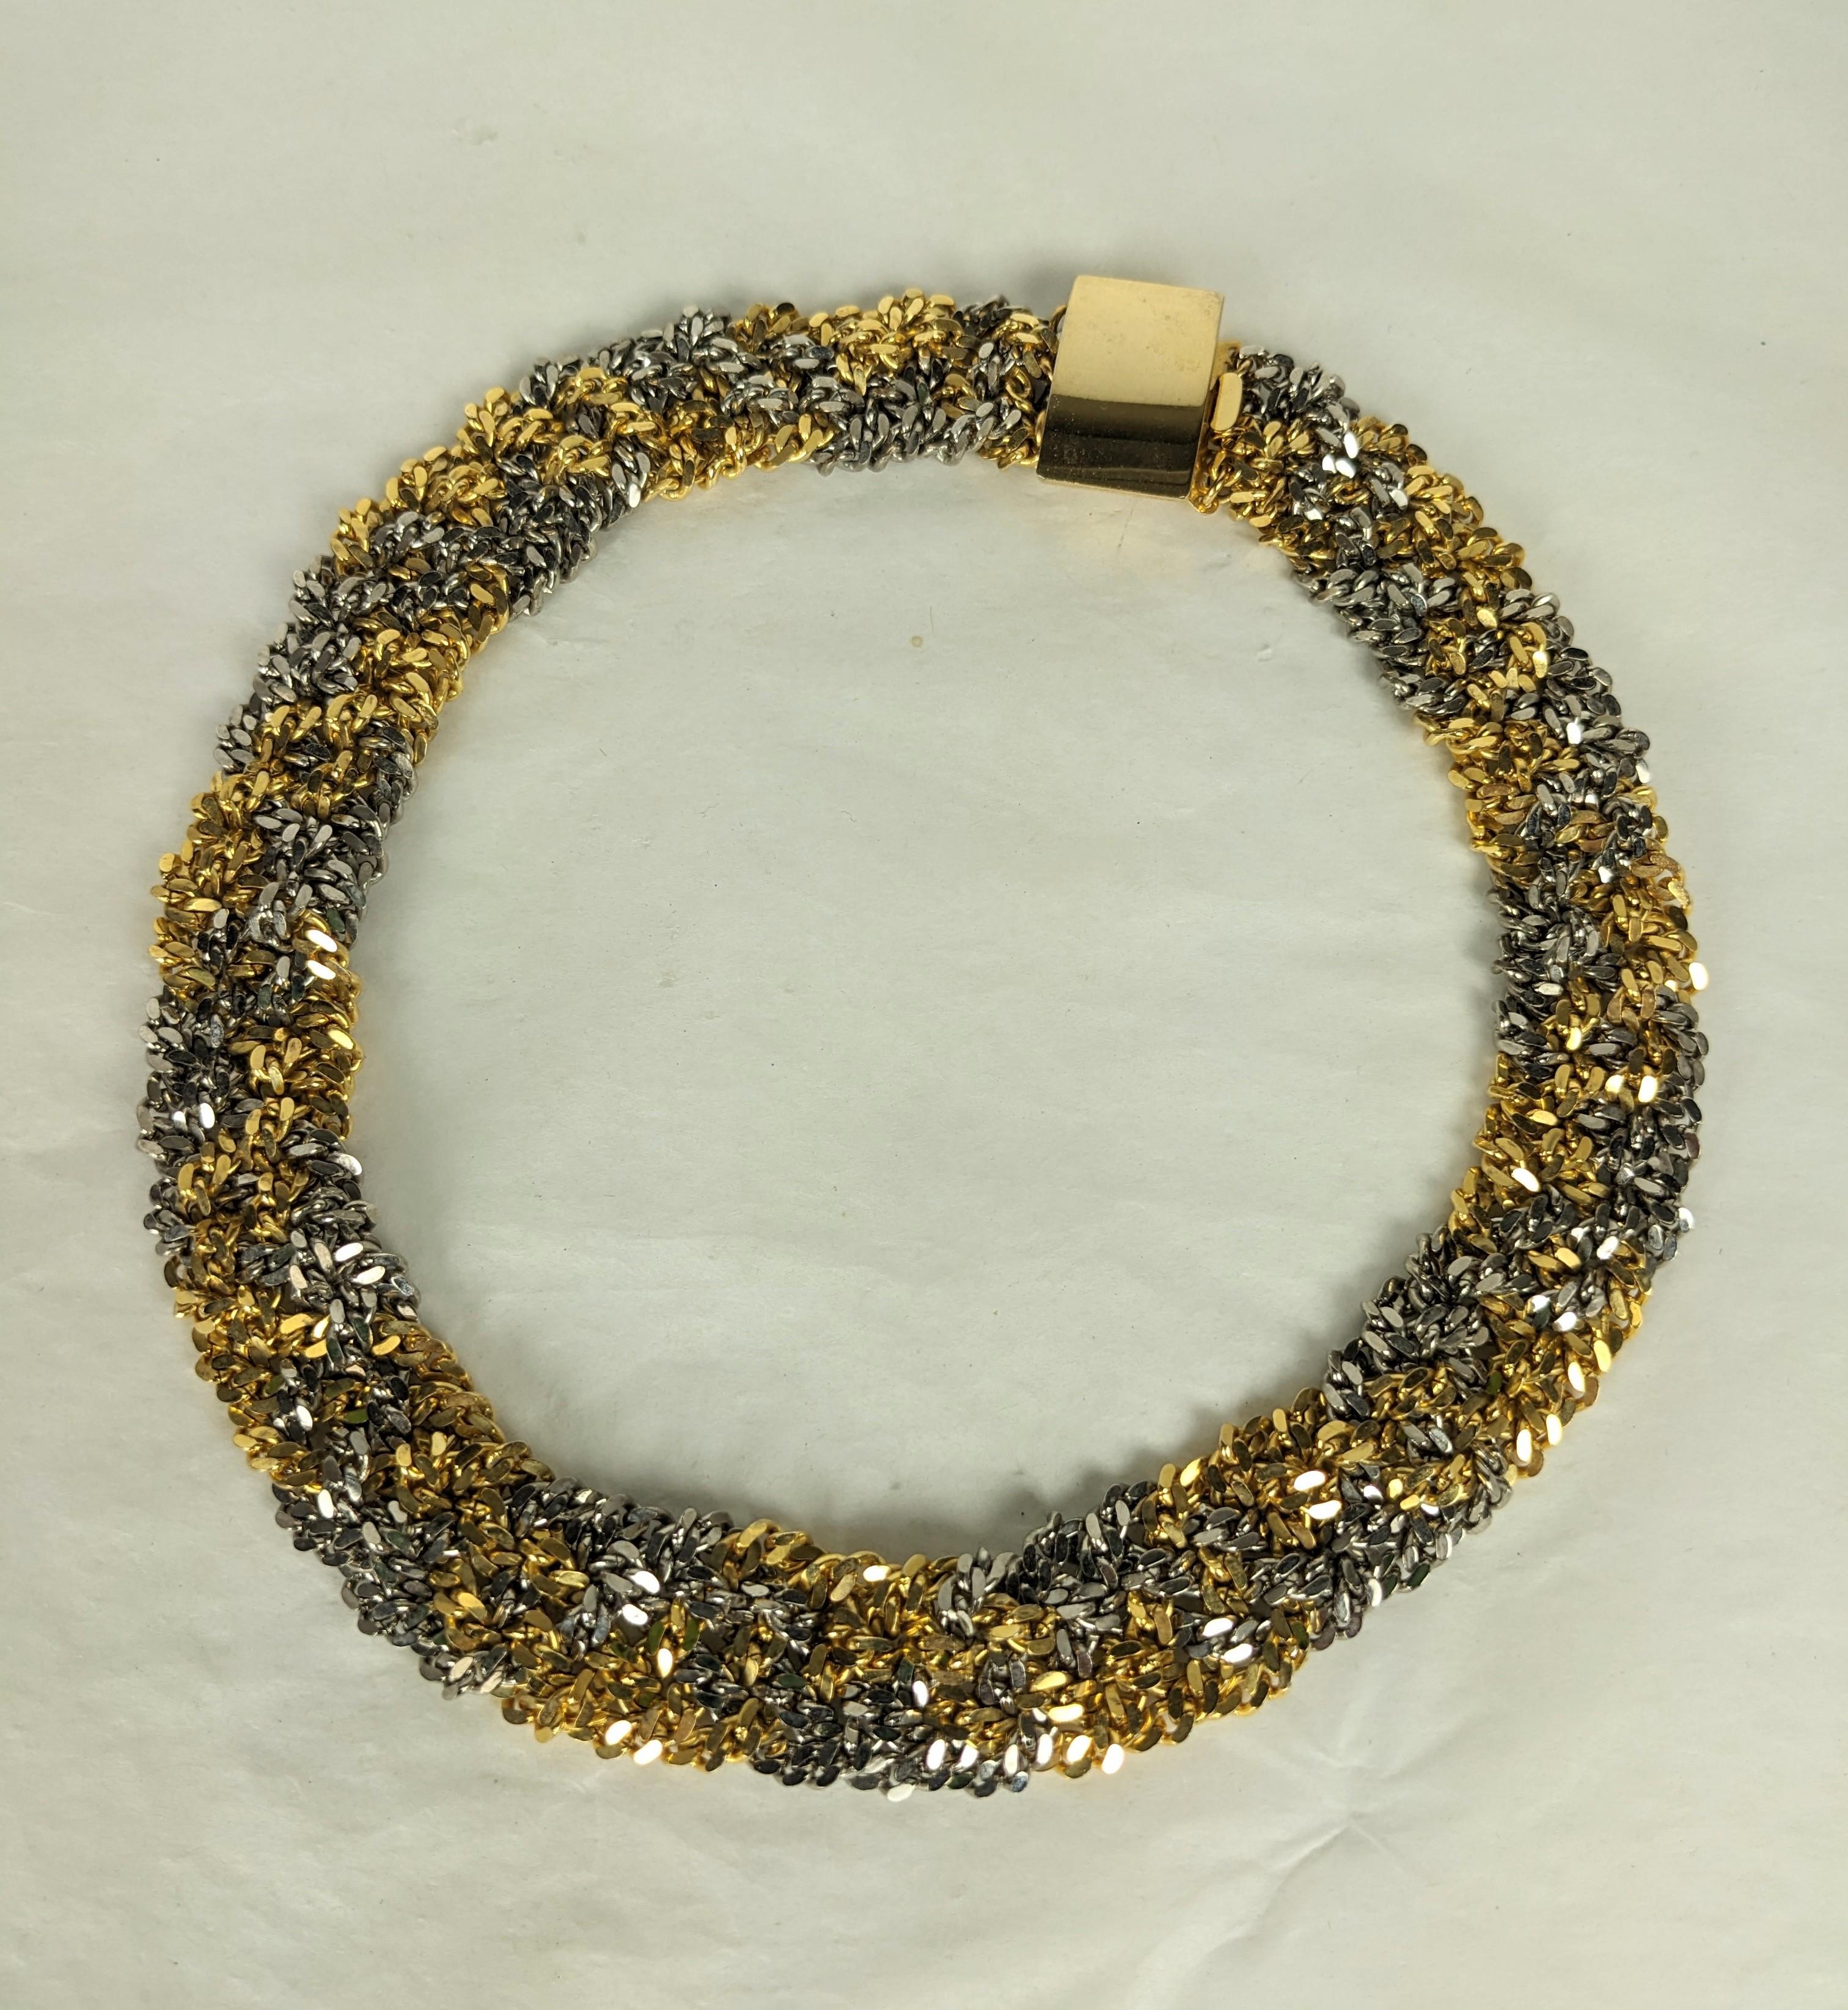 Unusual Braided 2 Tone Chain Necklace from the 1980's. Bright cut chain in gold and platinum tones is tightly braided to form a shaped necklace with gilt clasp. The effect is extremely unusual and different. Approx 17